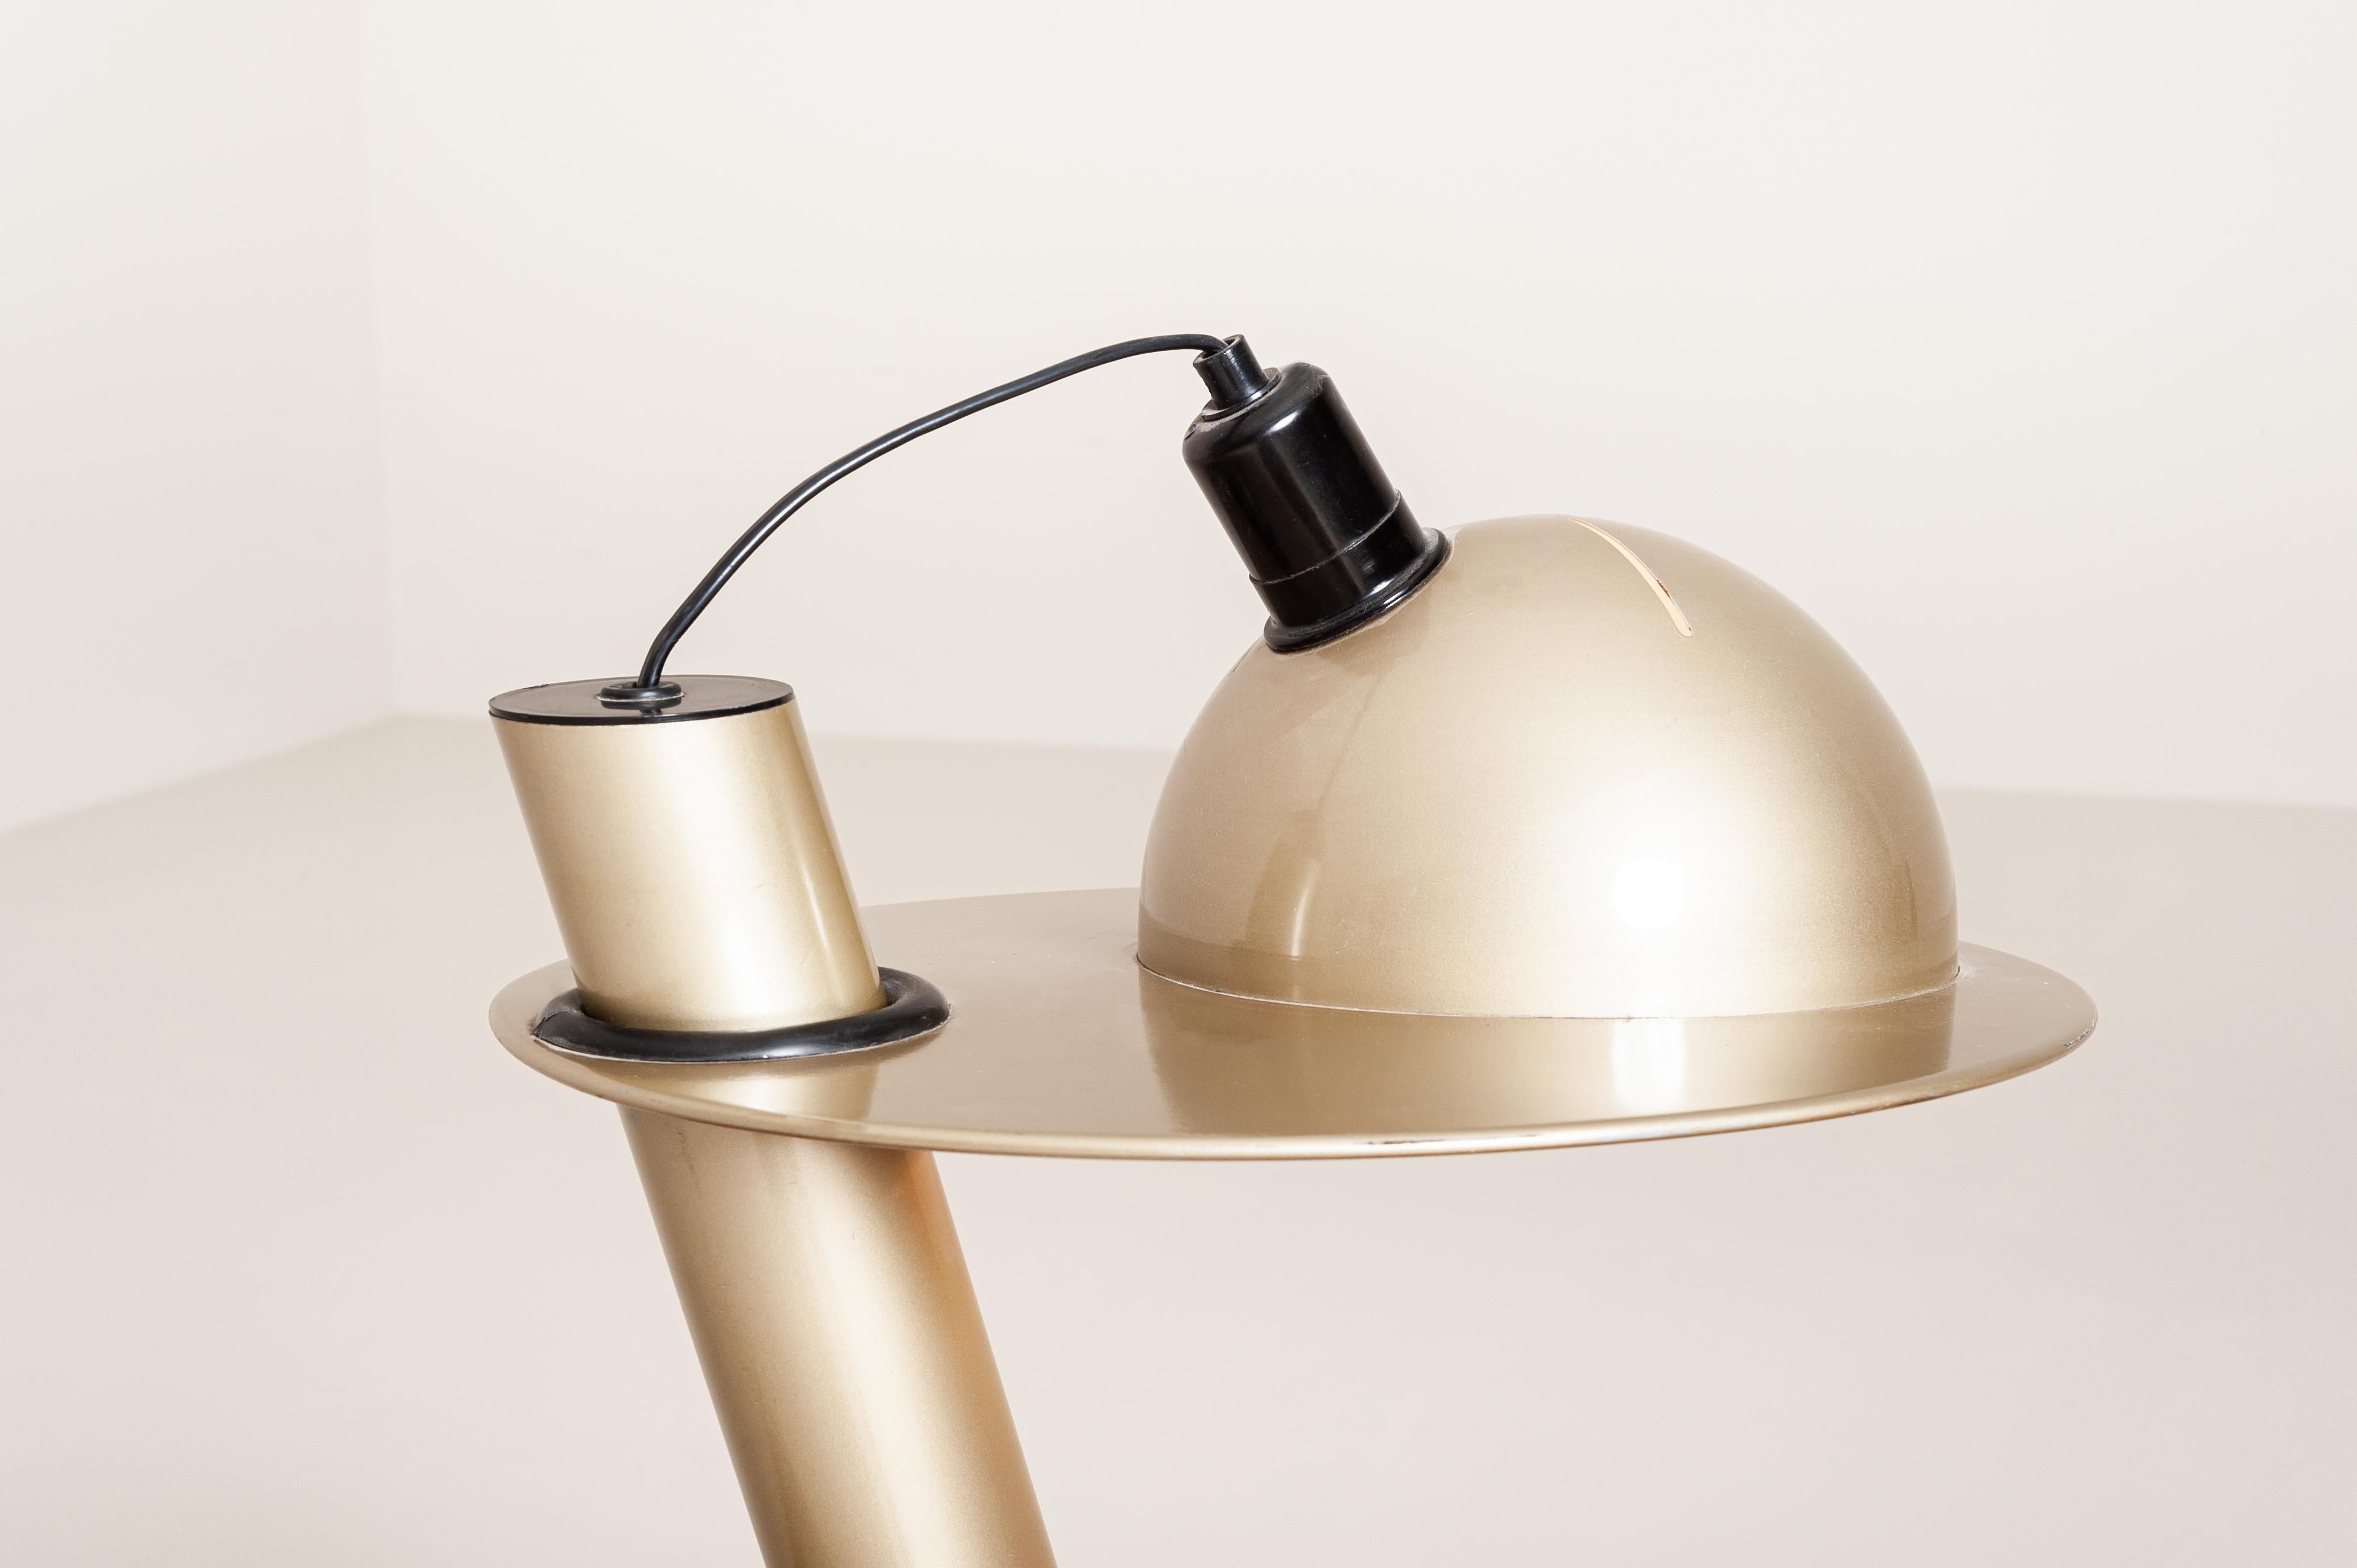 Stilnovo Space Age Adjustable Table Lamp, Metal, Plastic and Rubber, Italy 1970s For Sale 3